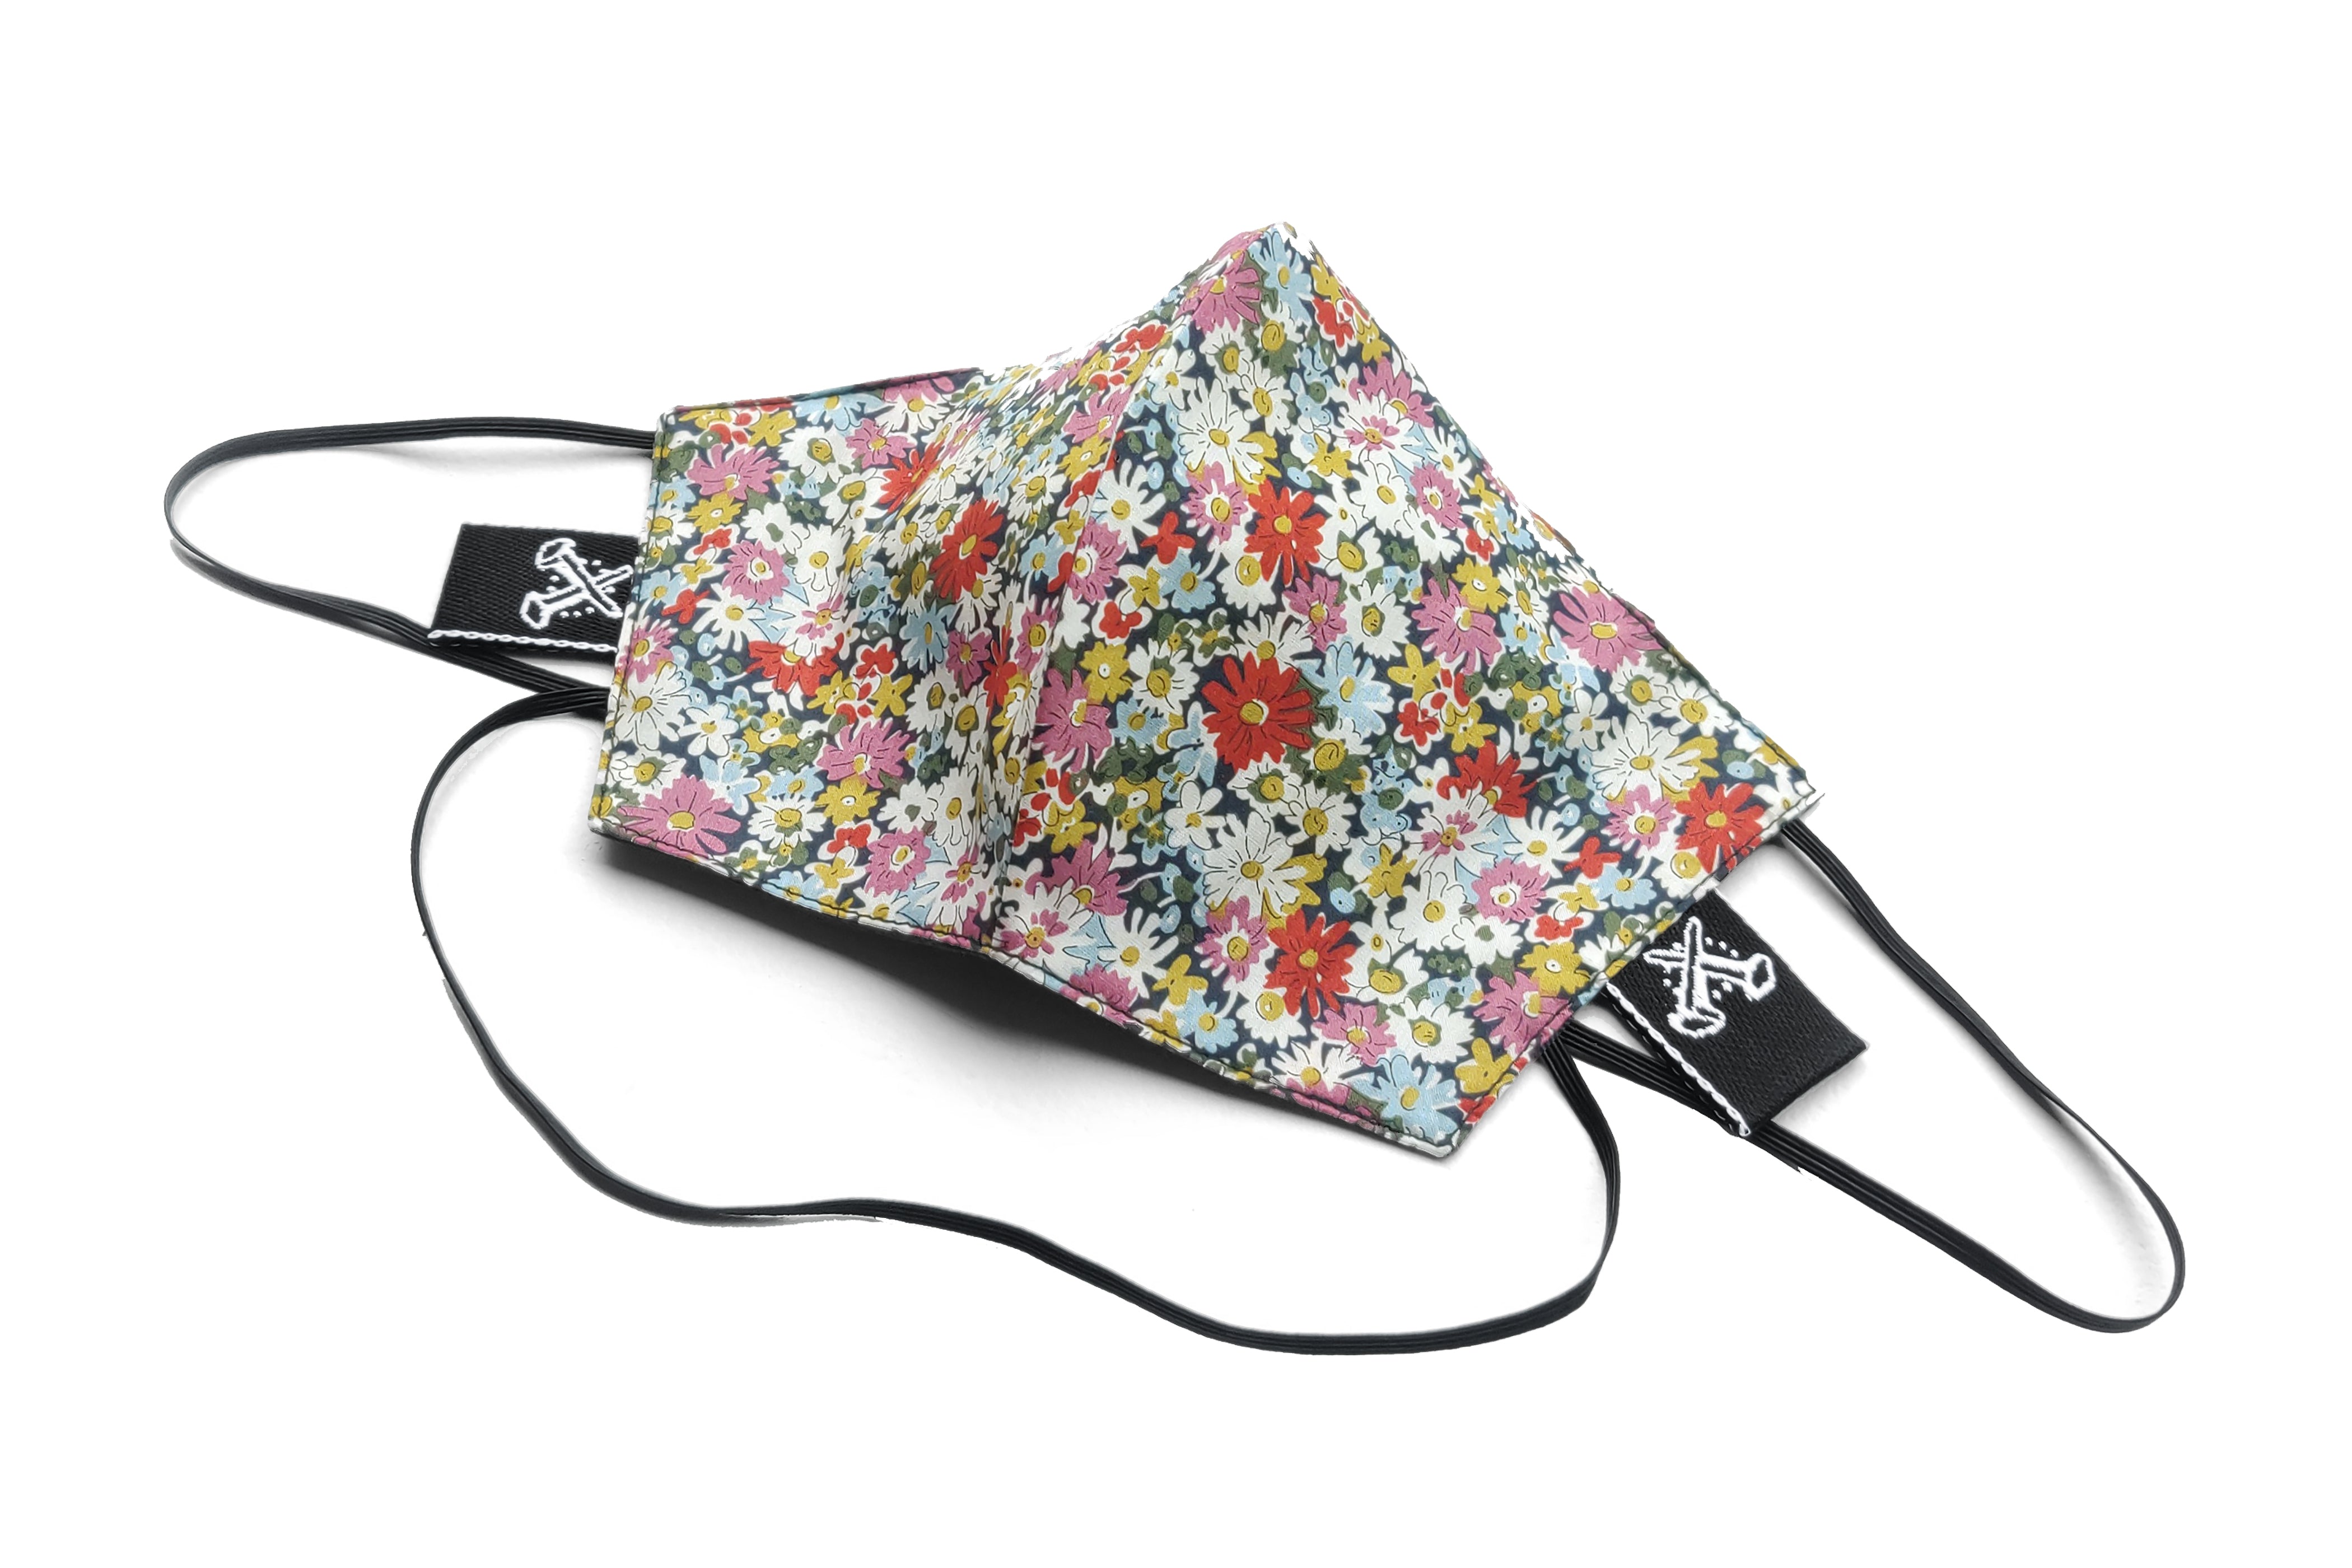 Liberty of London Floral Collection - September 26, 2020 Drop